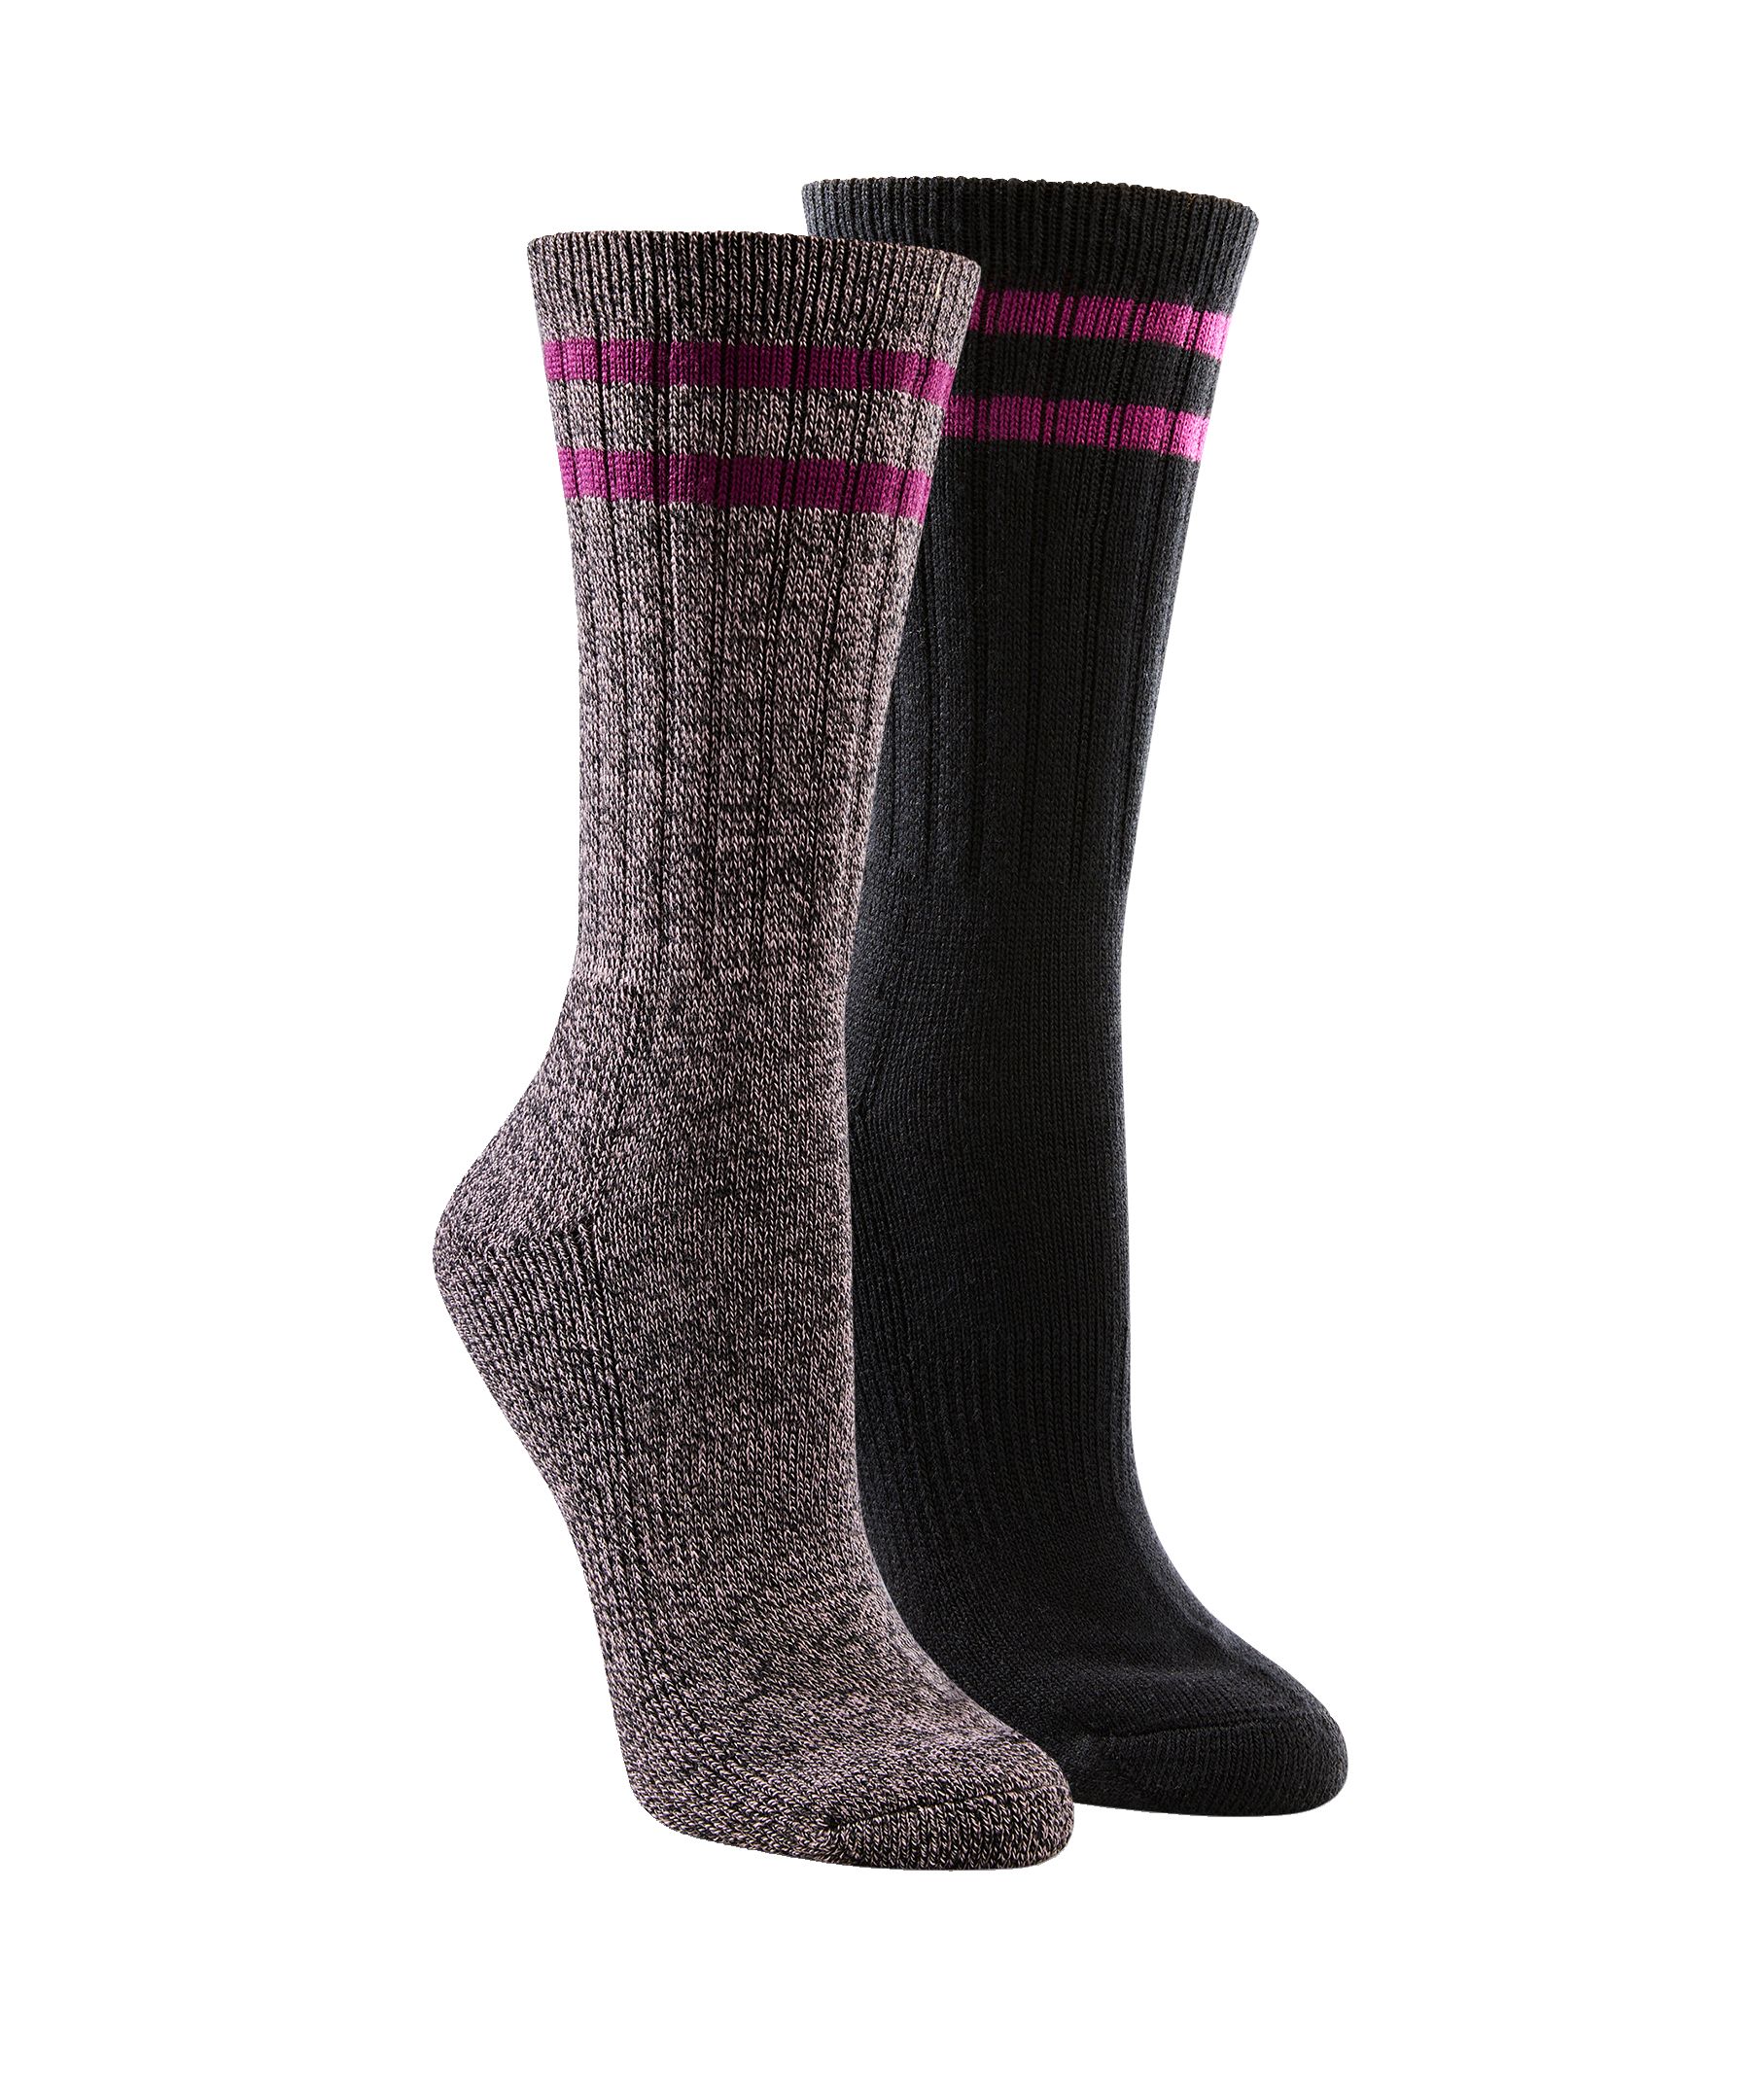 https://media-www.marks.com/product/marks-work-wearhouse/ladies-world/ladies-accessories/410036553874/windriver-women-s-2-pack-super-soft-thermal-quad-comfort-boot-socks-33b00f1f-1164-4a9b-9650-d8f165b2a47c-jpgrendition.jpg?imdensity=1&imwidth=1244&impolicy=mZoom